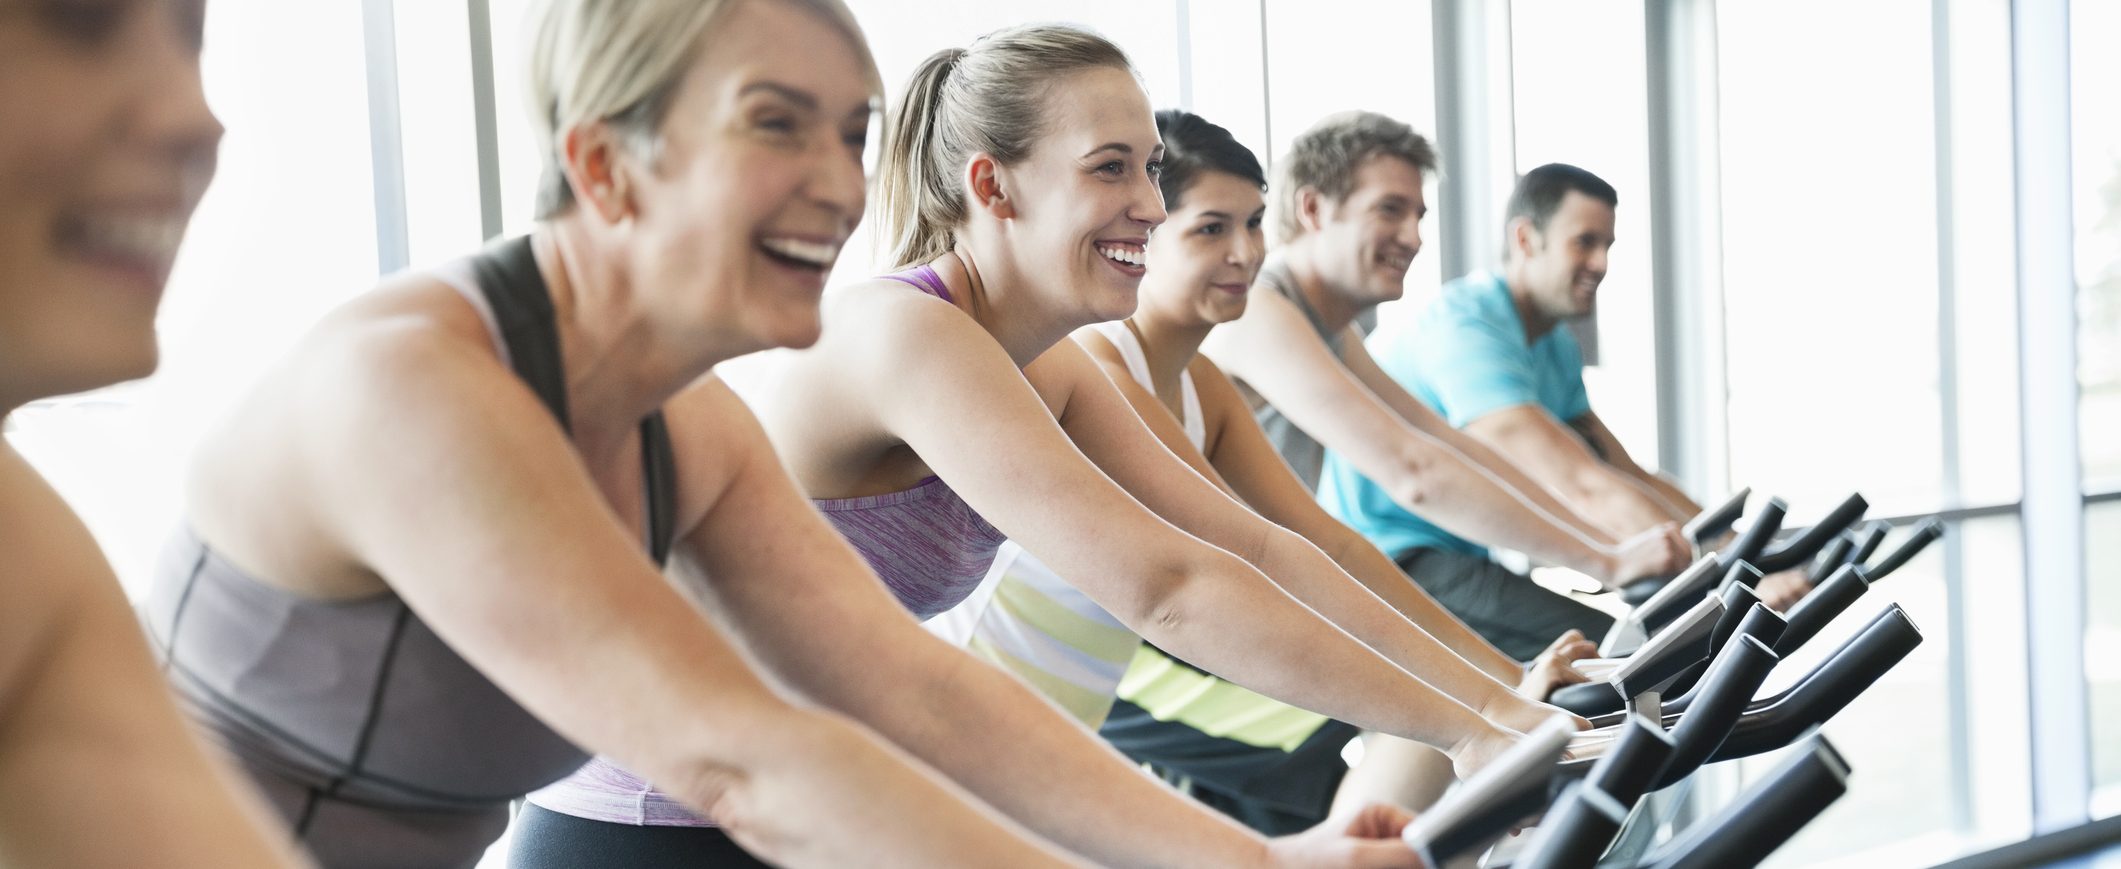 People on exercise bikes during a trainer-led spin class.